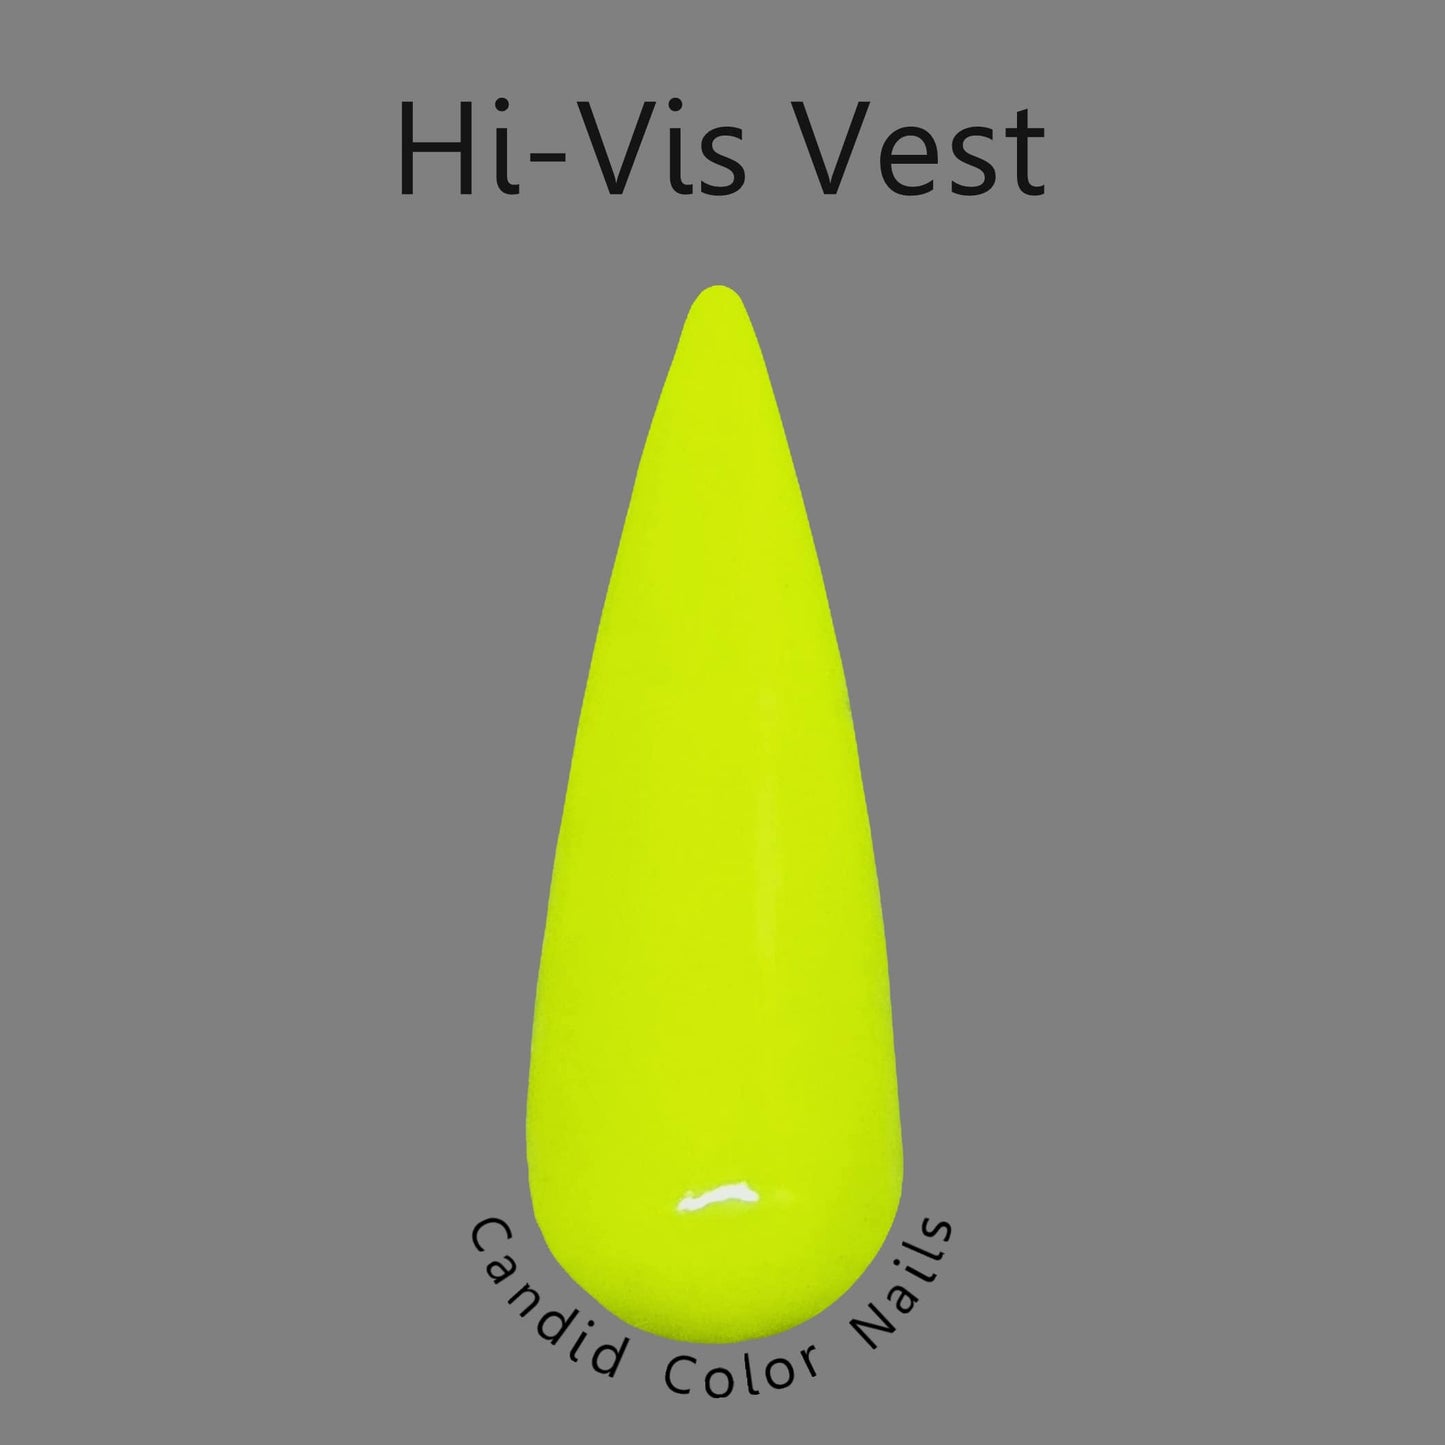 A finger nail swatch with Hi-Vis Vest, a bright neon safety yellow dip powder.